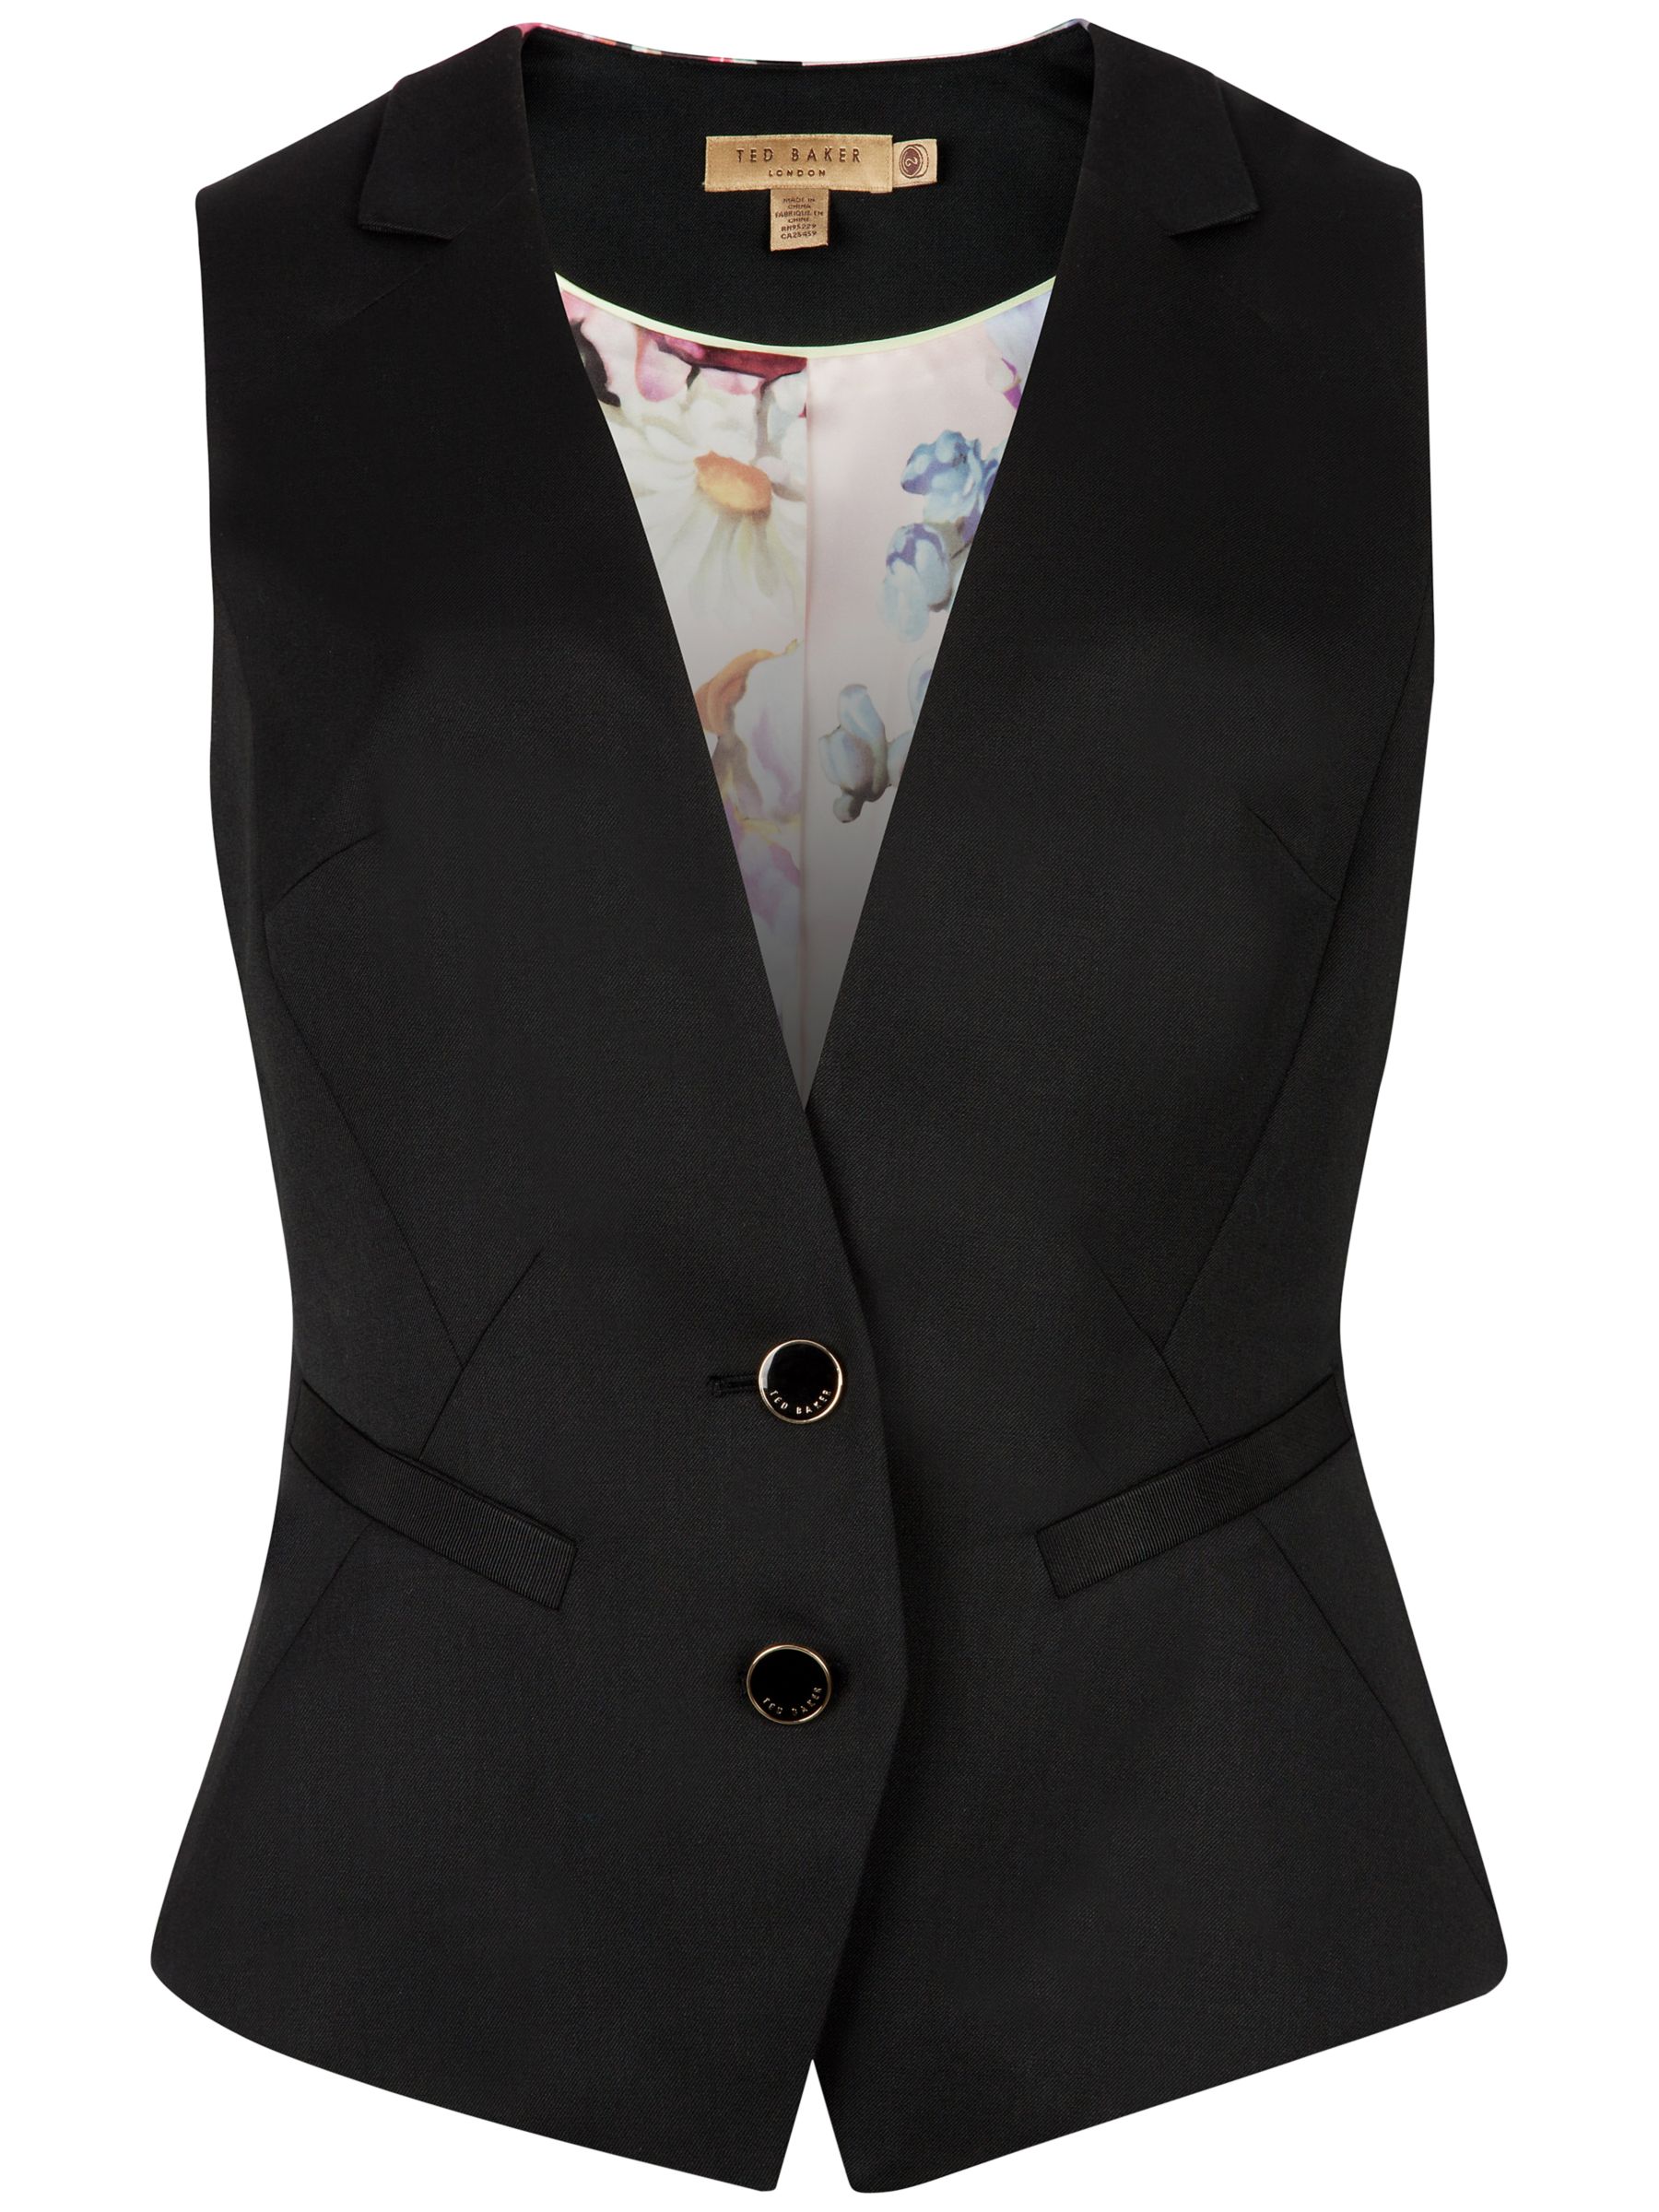 Ted Baker Quinnew Timeless Suit Waistcoat, Black at John Lewis & Partners